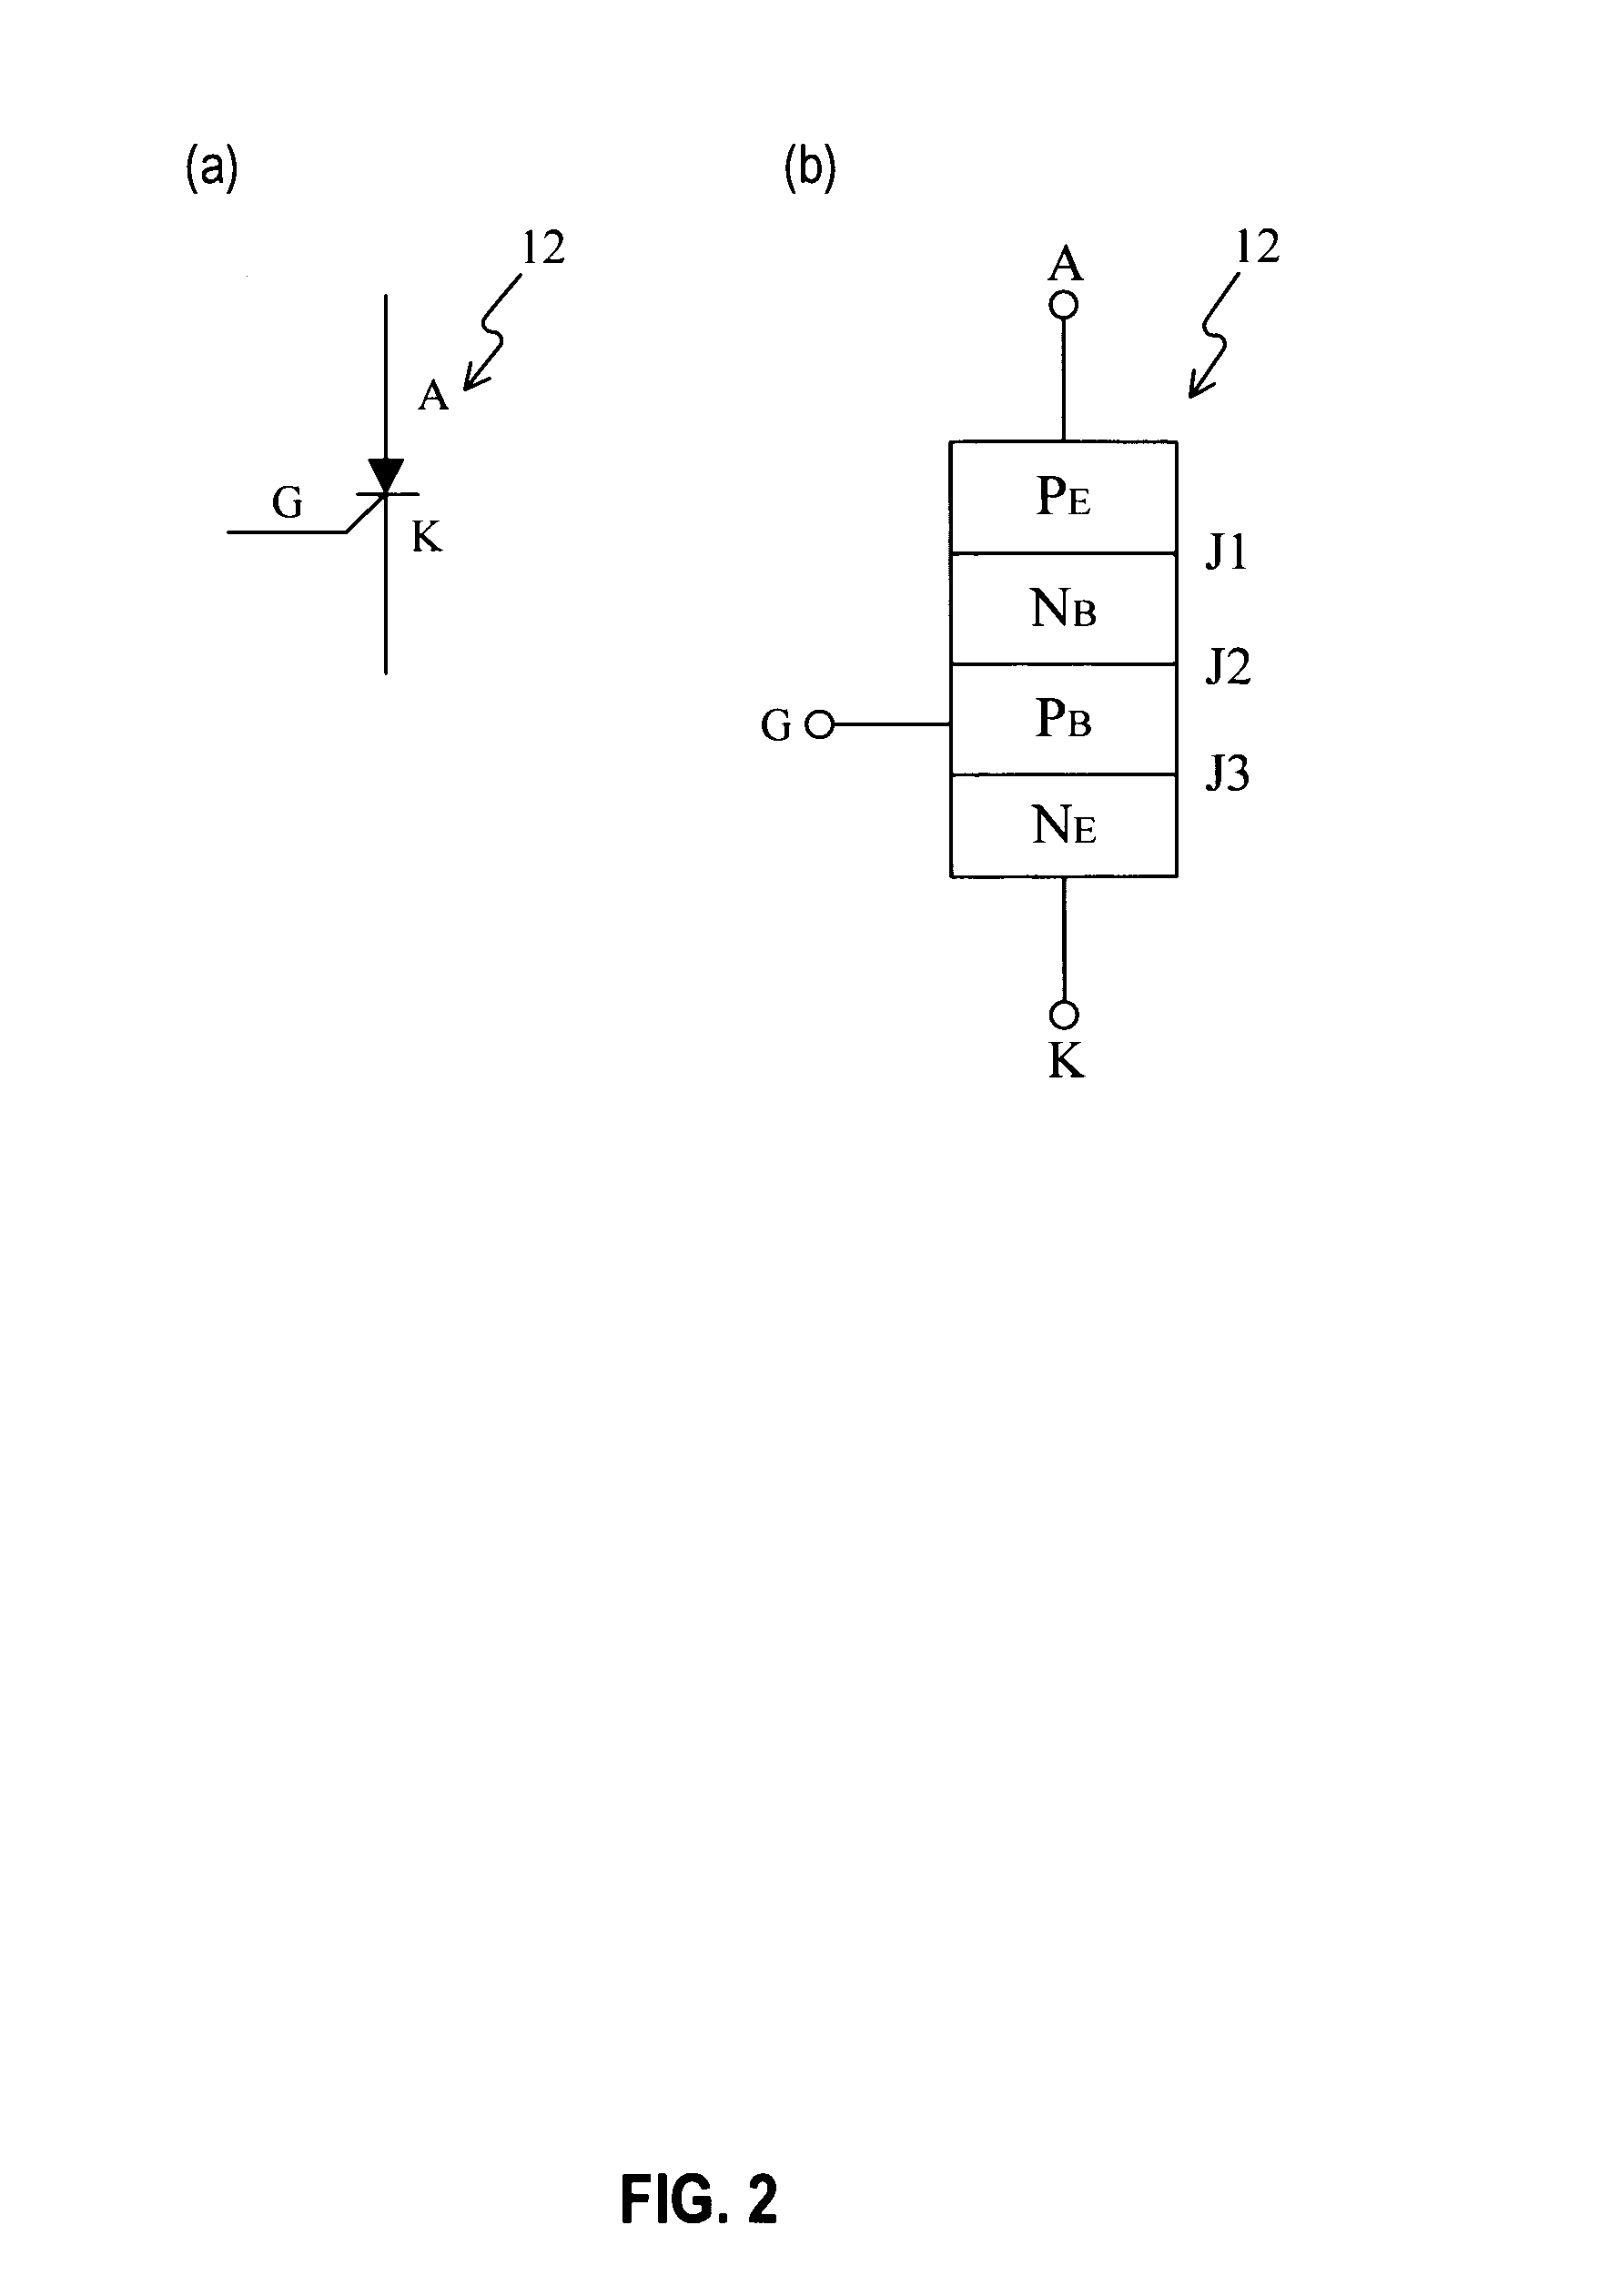 Inverter apparatus comprising switching elements